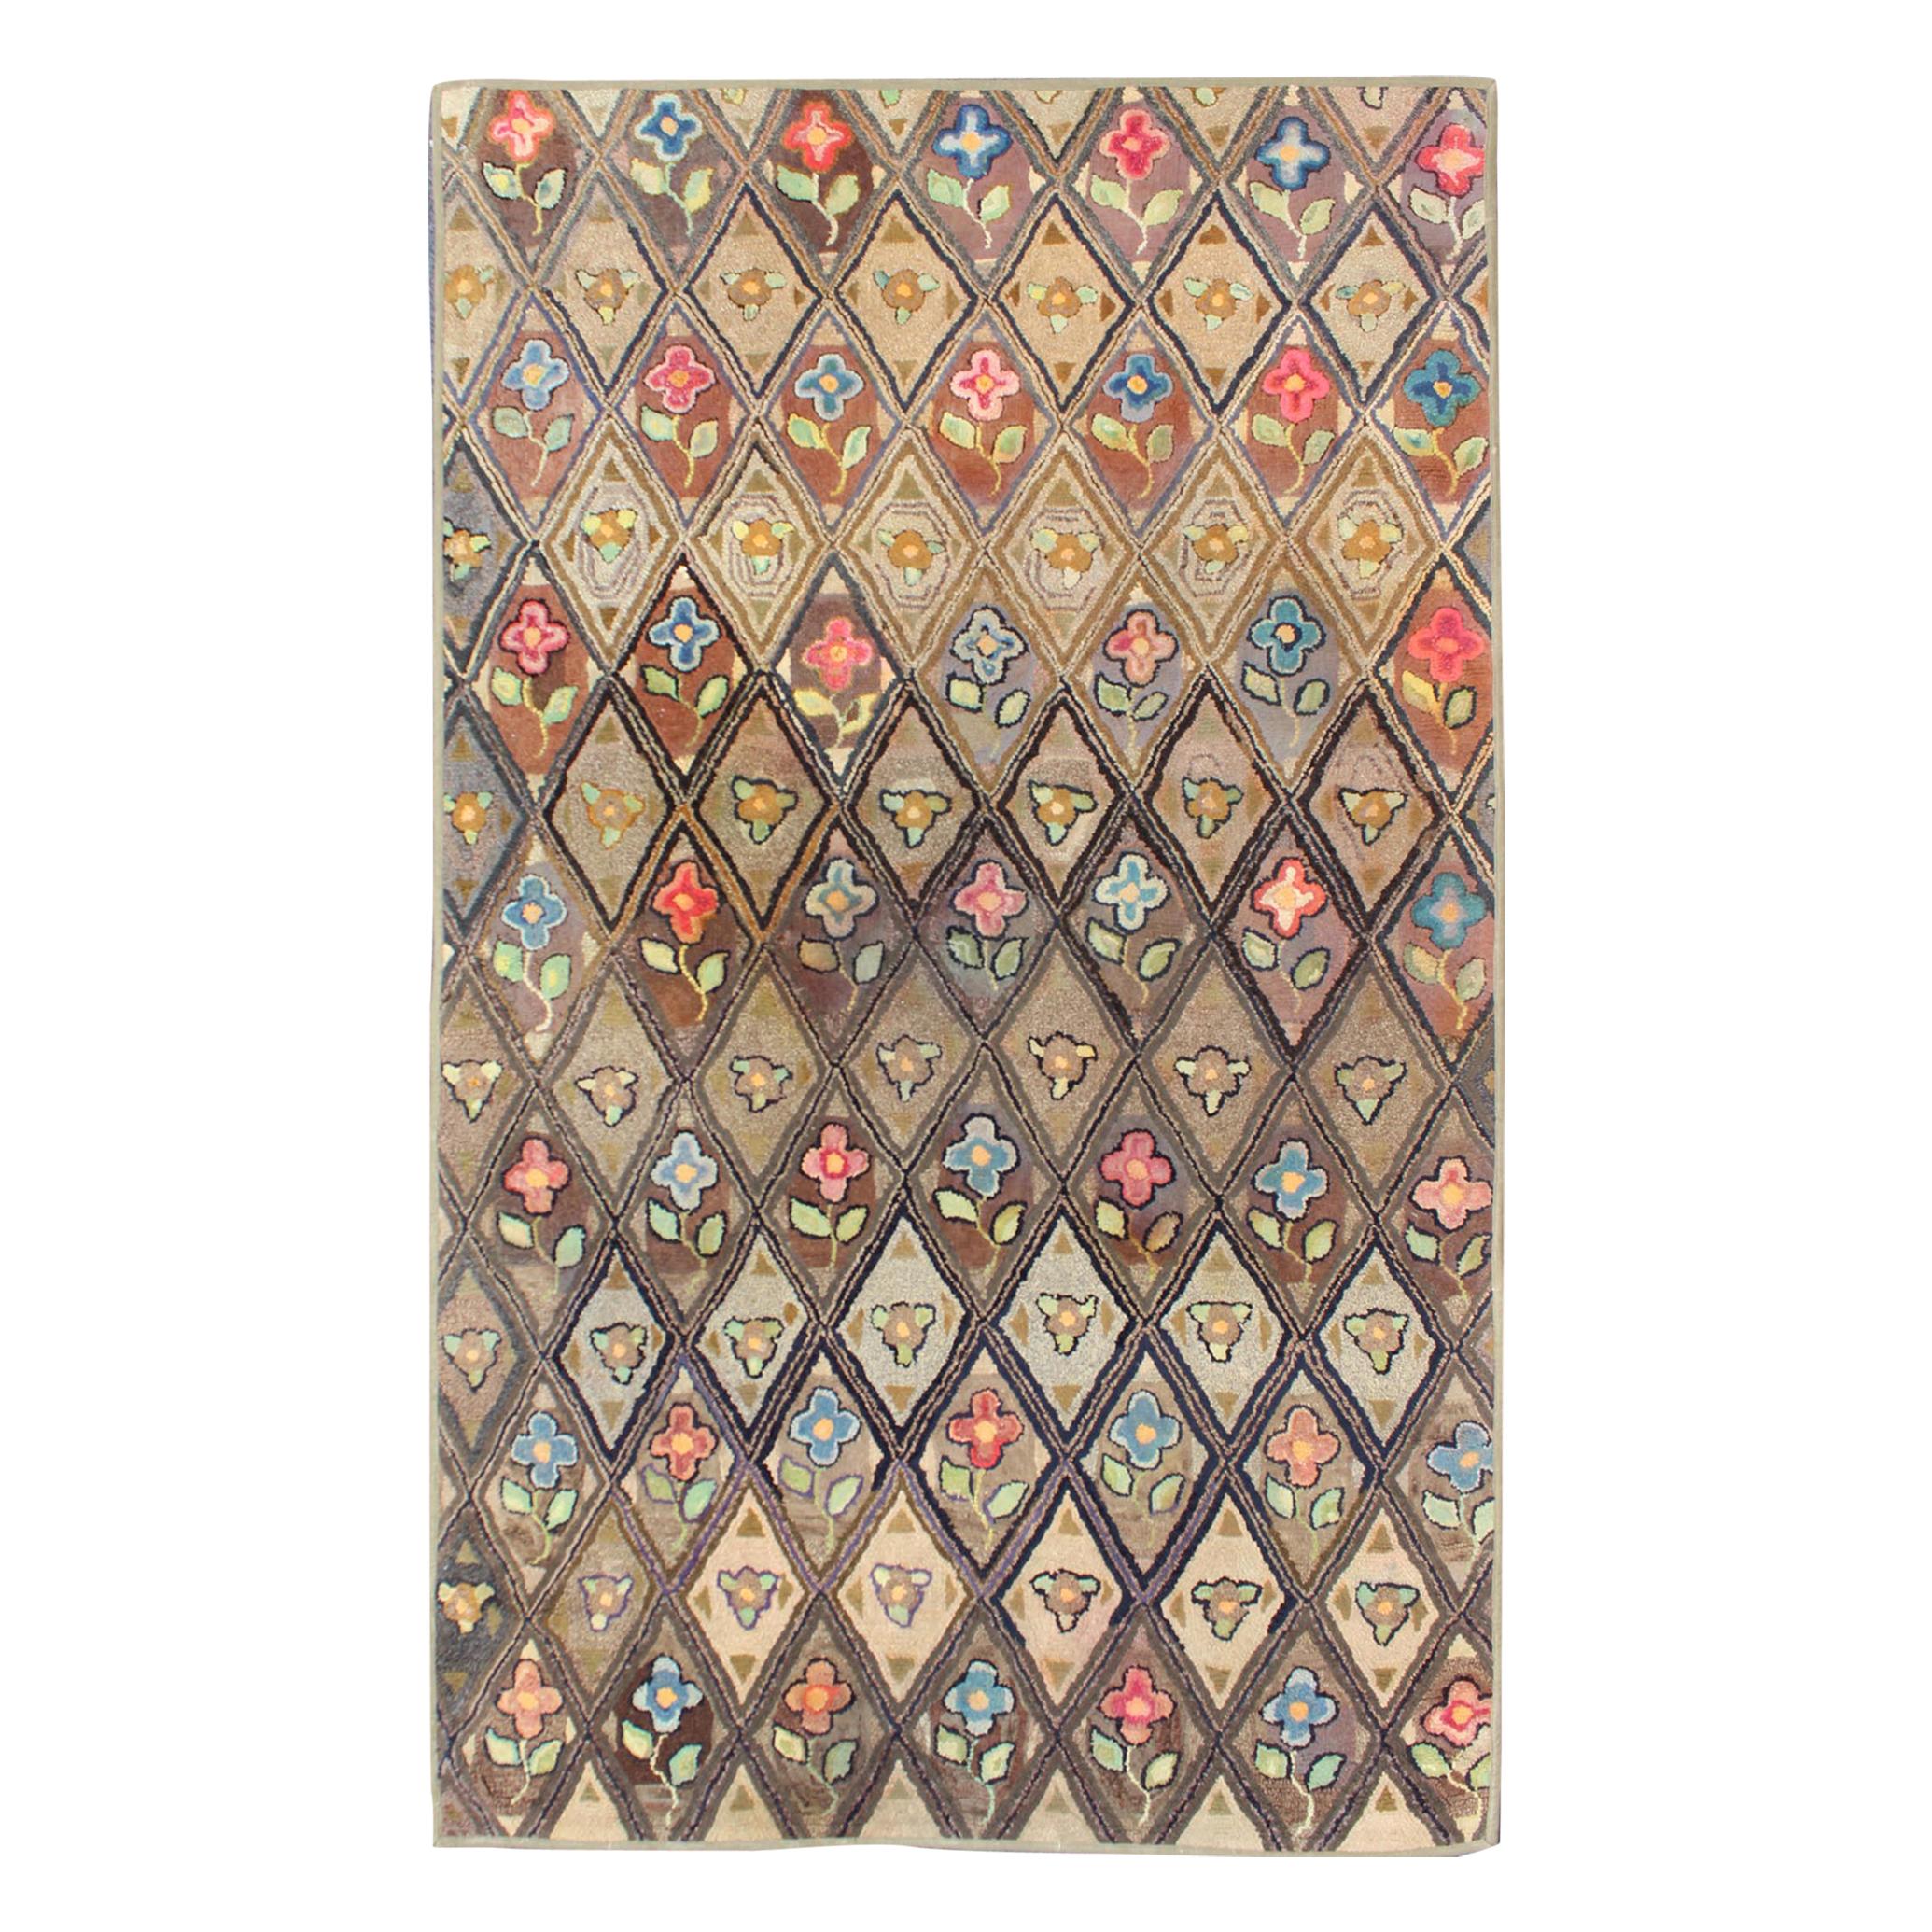 Outstanding Antique American Hooked Rug with Diamond Floral Design